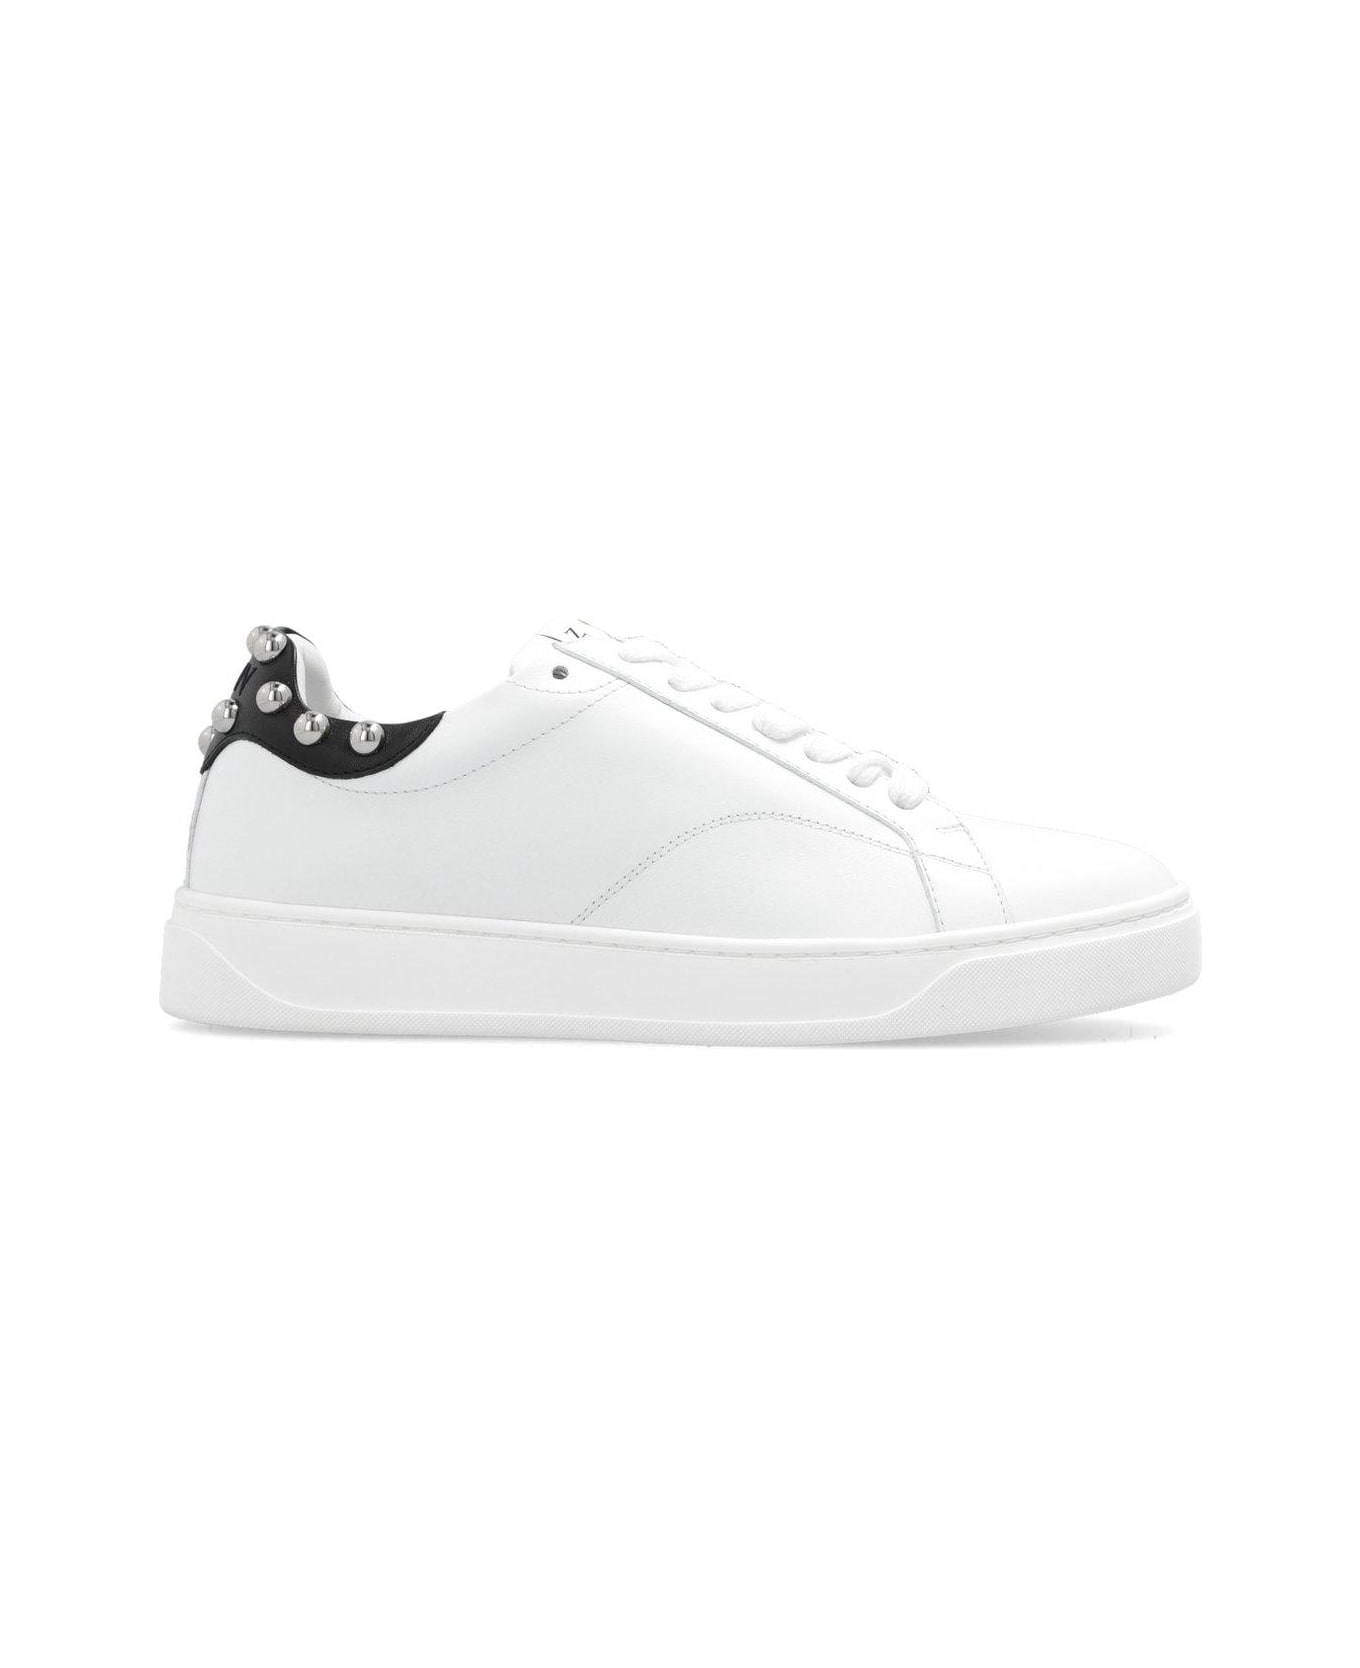 Lanvin Round Toe Lace-up Sneakers - White Silver